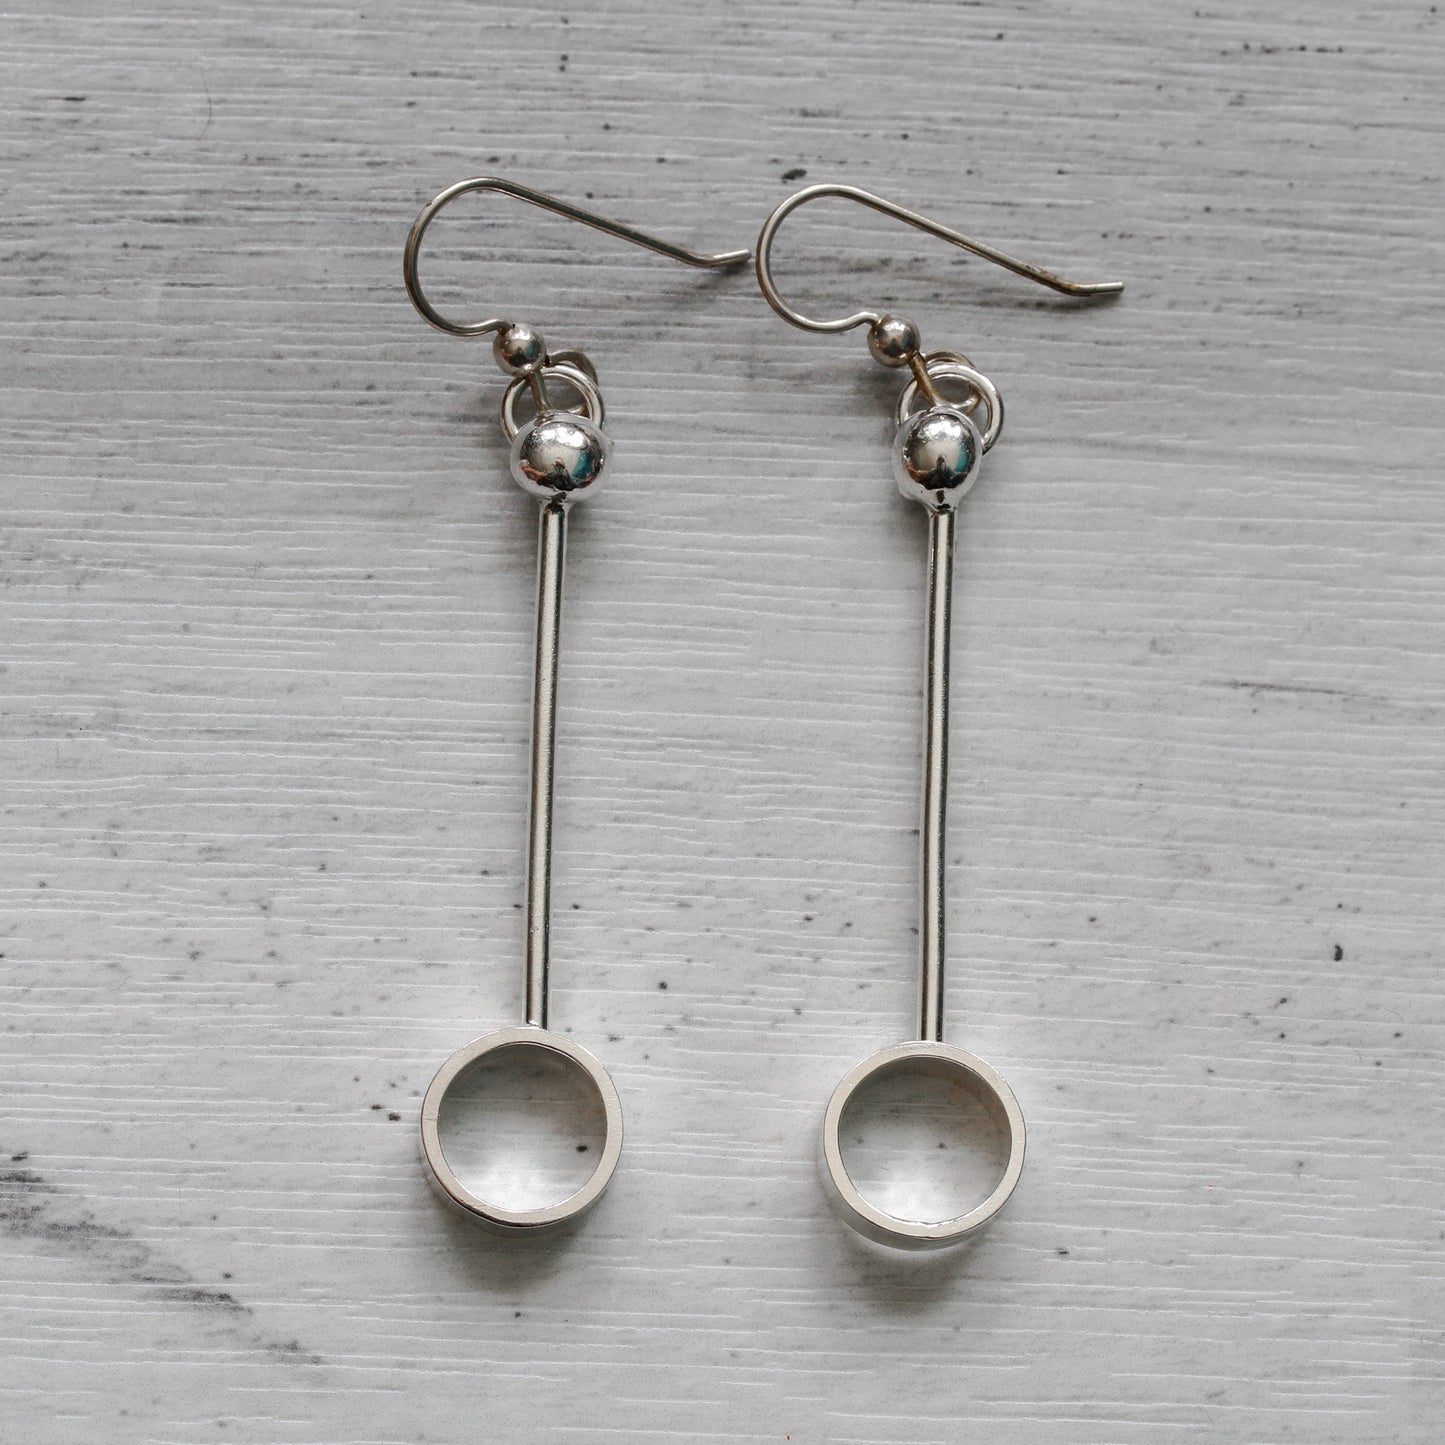 Sterling silver minimalist earrings for every day wear. Geometric and modernist.